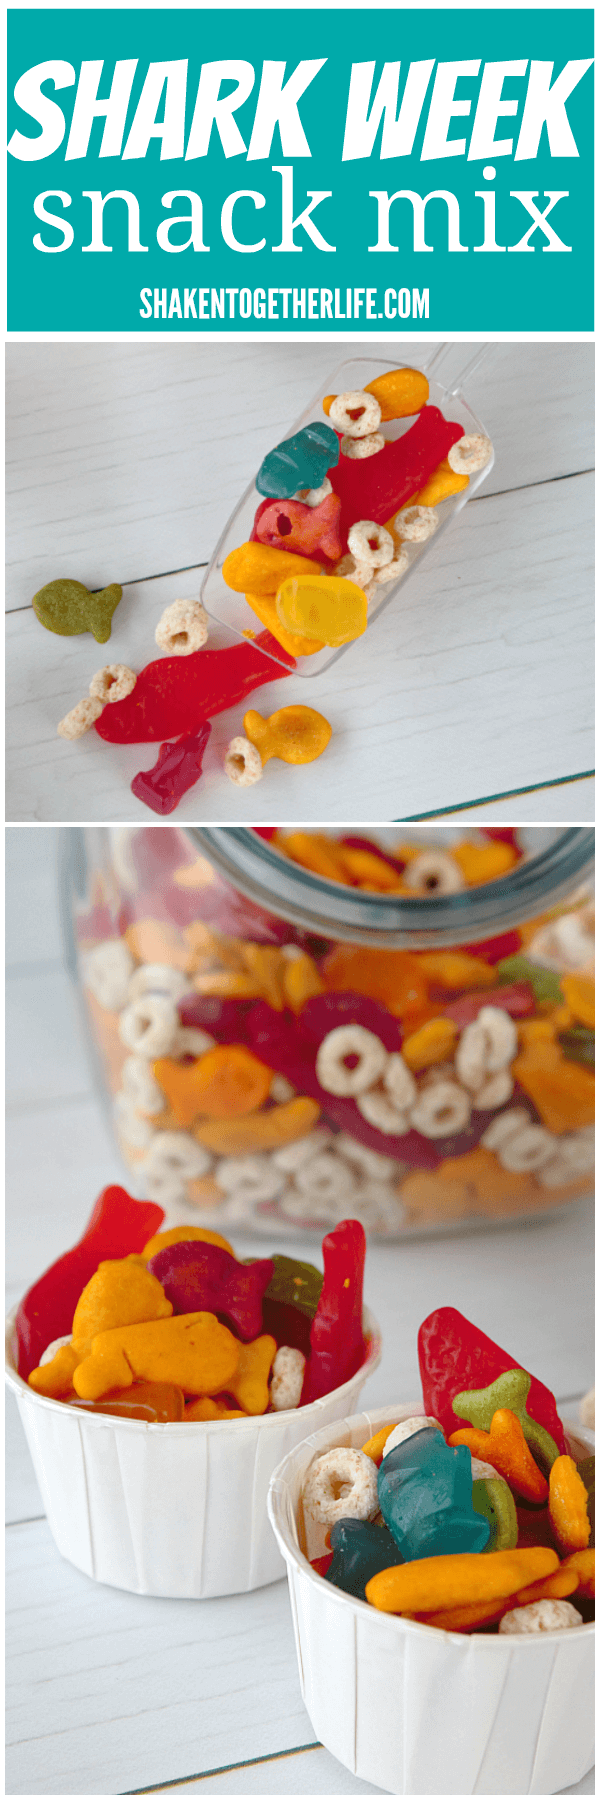 Need a shark themed snack? Try our colorful, sweet and salty Shark Week Snack Mix!